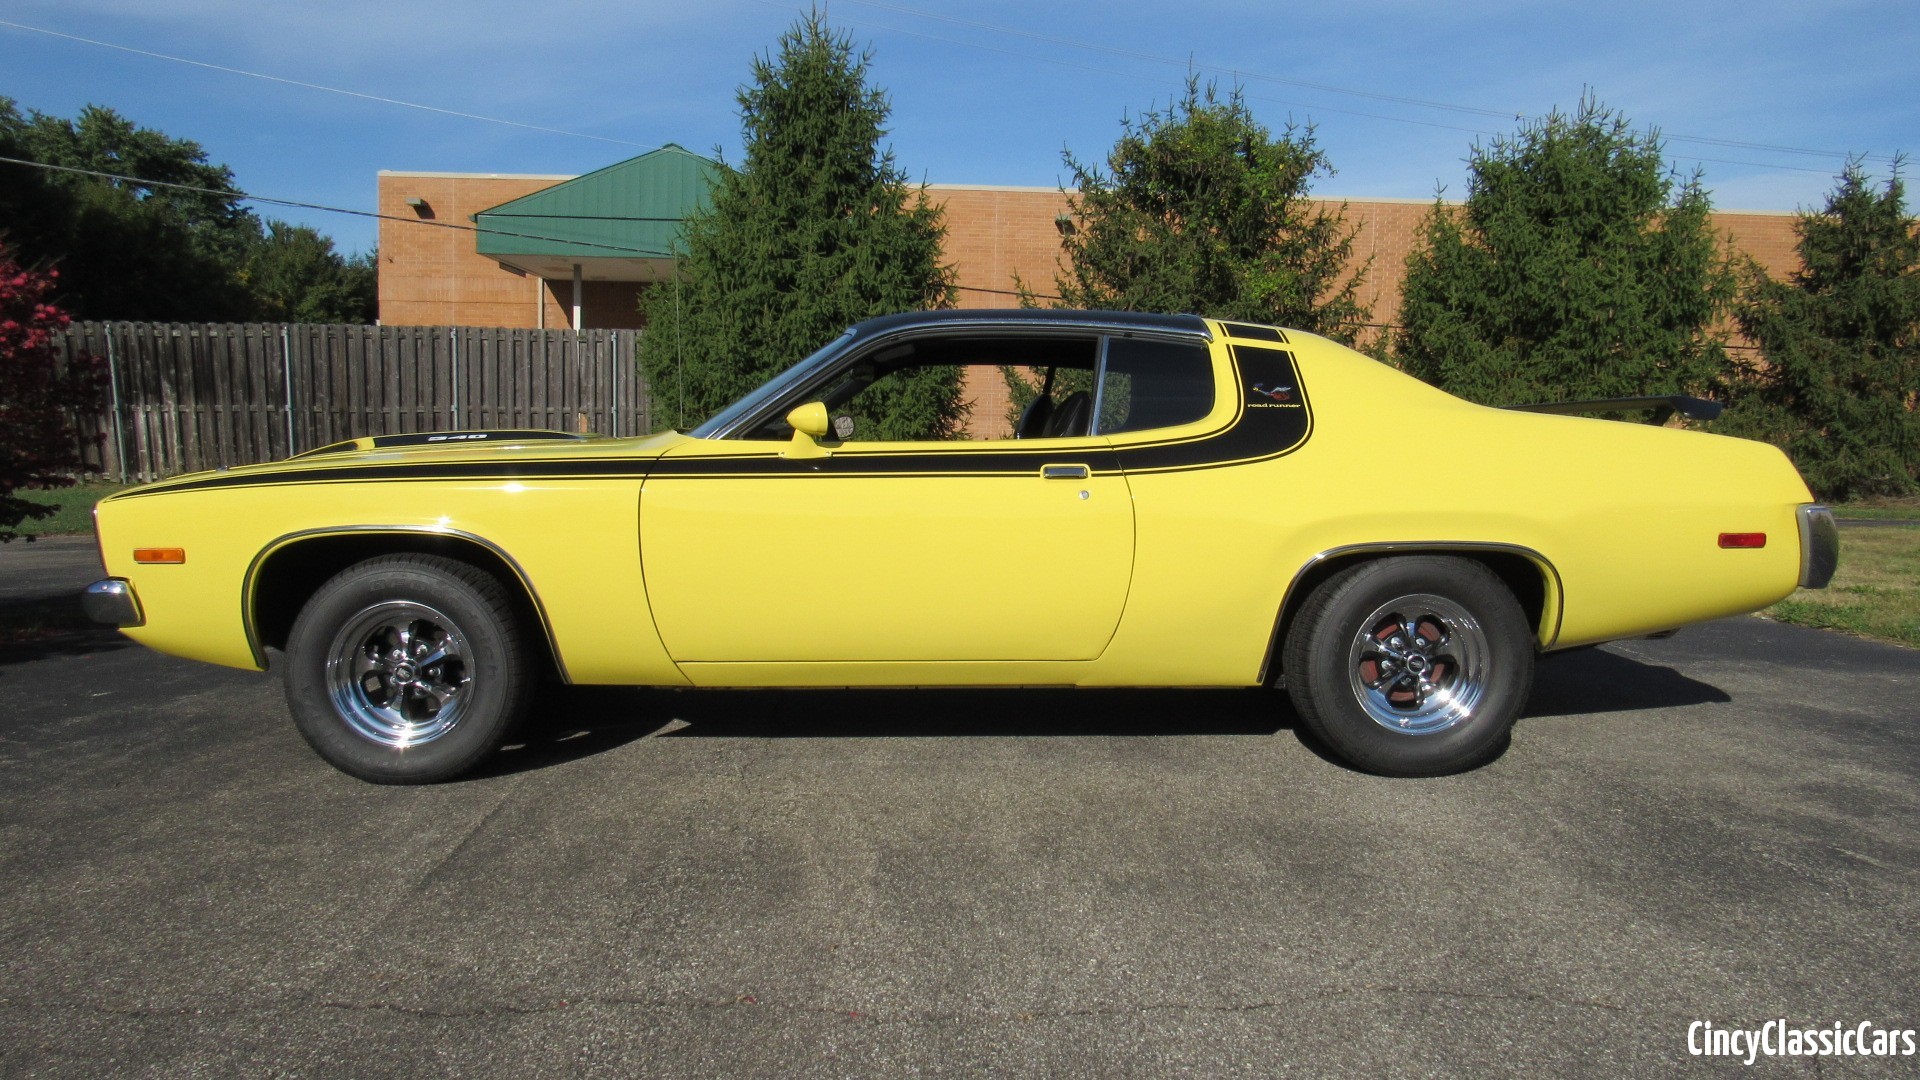 1973 Plymouth Road Runner, 340 Auto, 88K Miles, Sold! Cincy Classic Cars picture